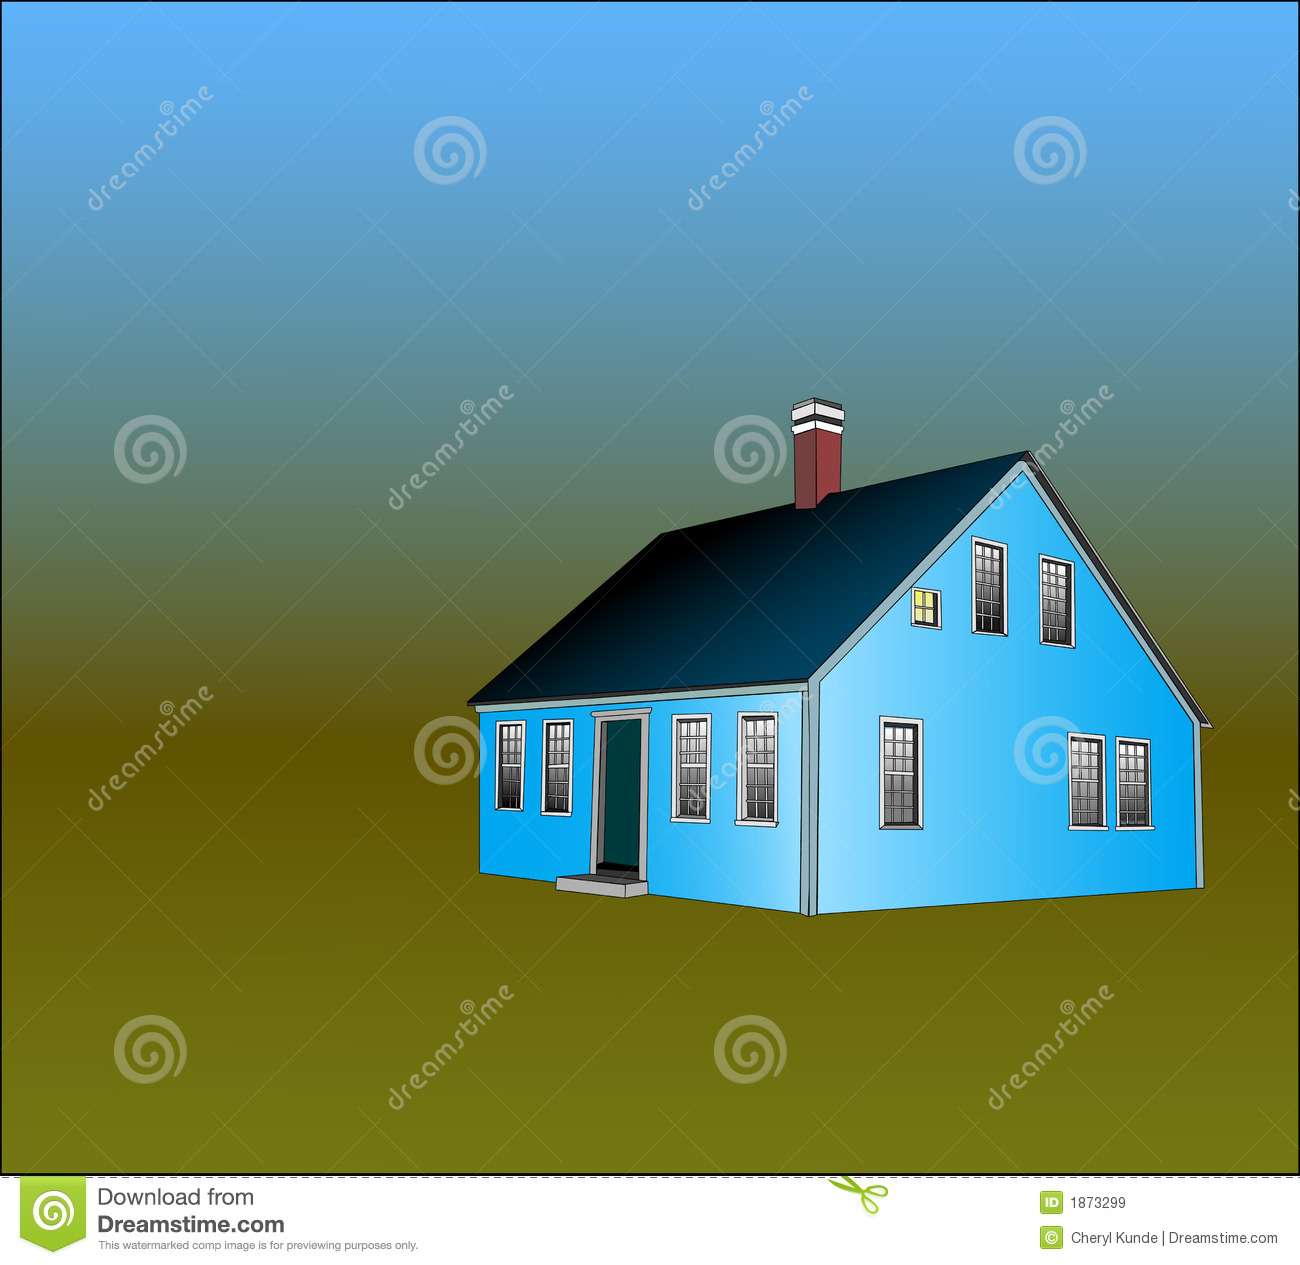 Cape Cod Style House Royalty Free Stock Images   Image  1873299